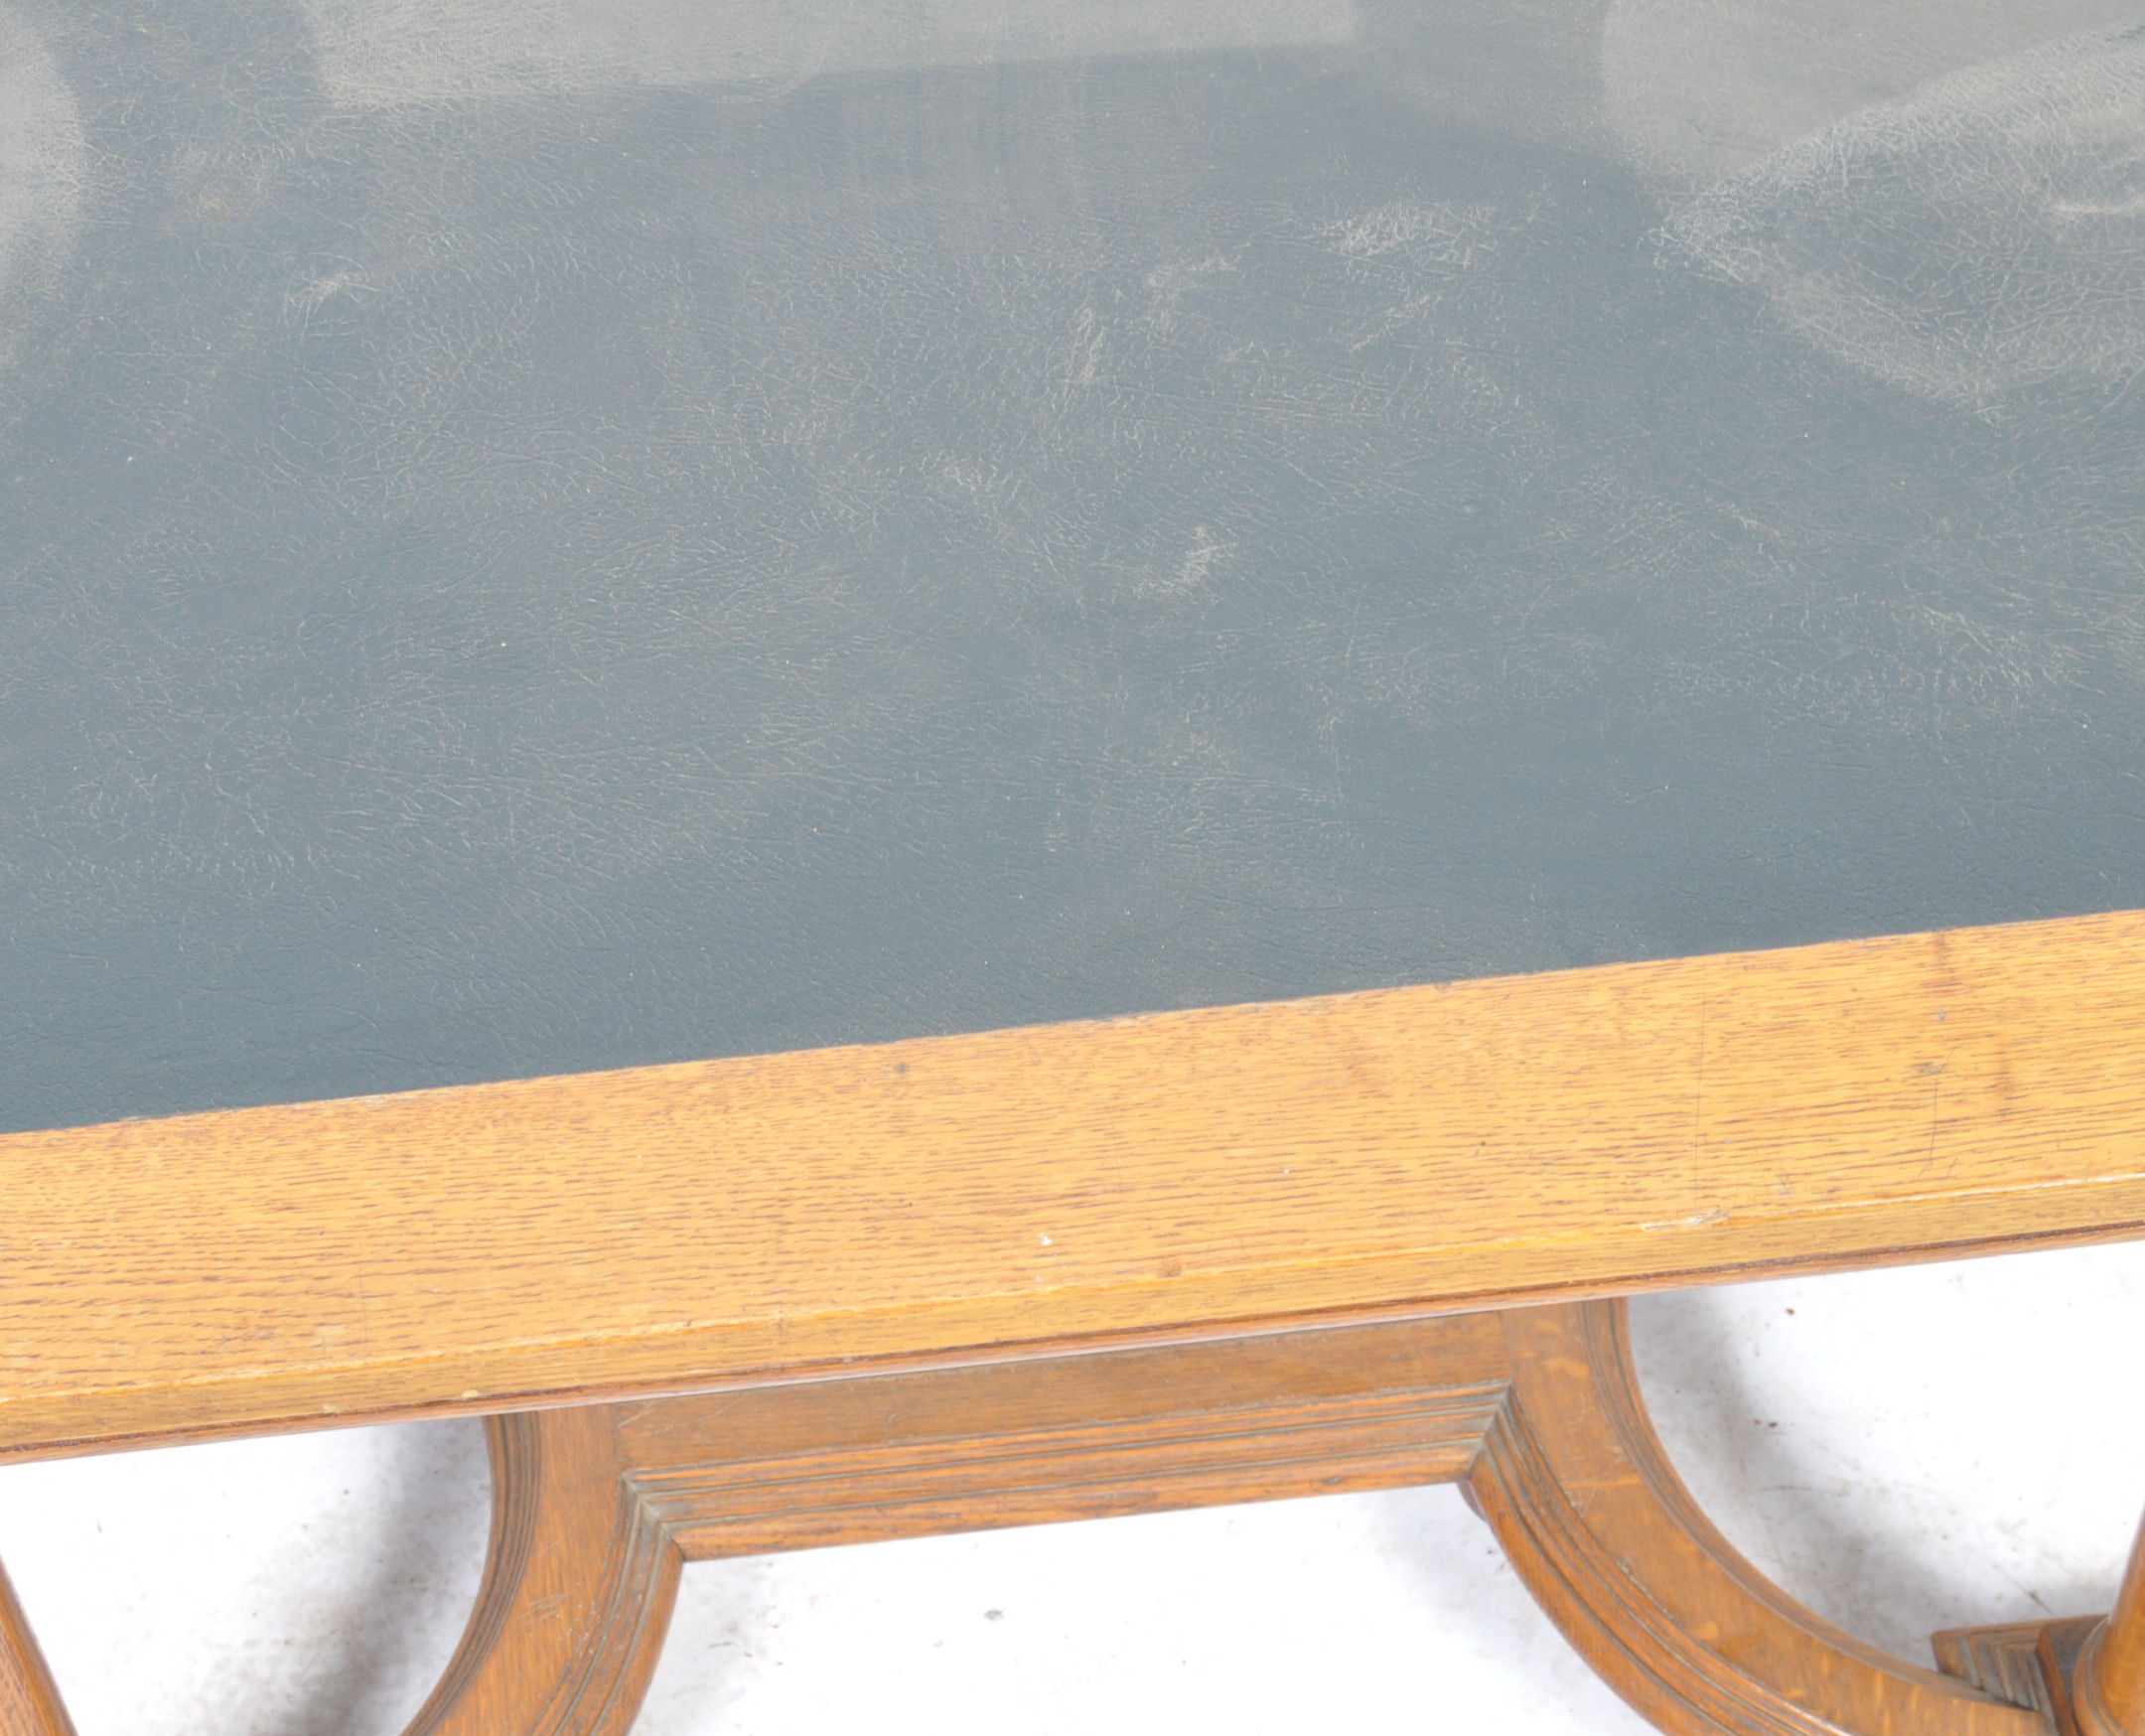 STUNNING 19TH CENTURY GOTHIC OAK DINING TABLE - Image 4 of 8